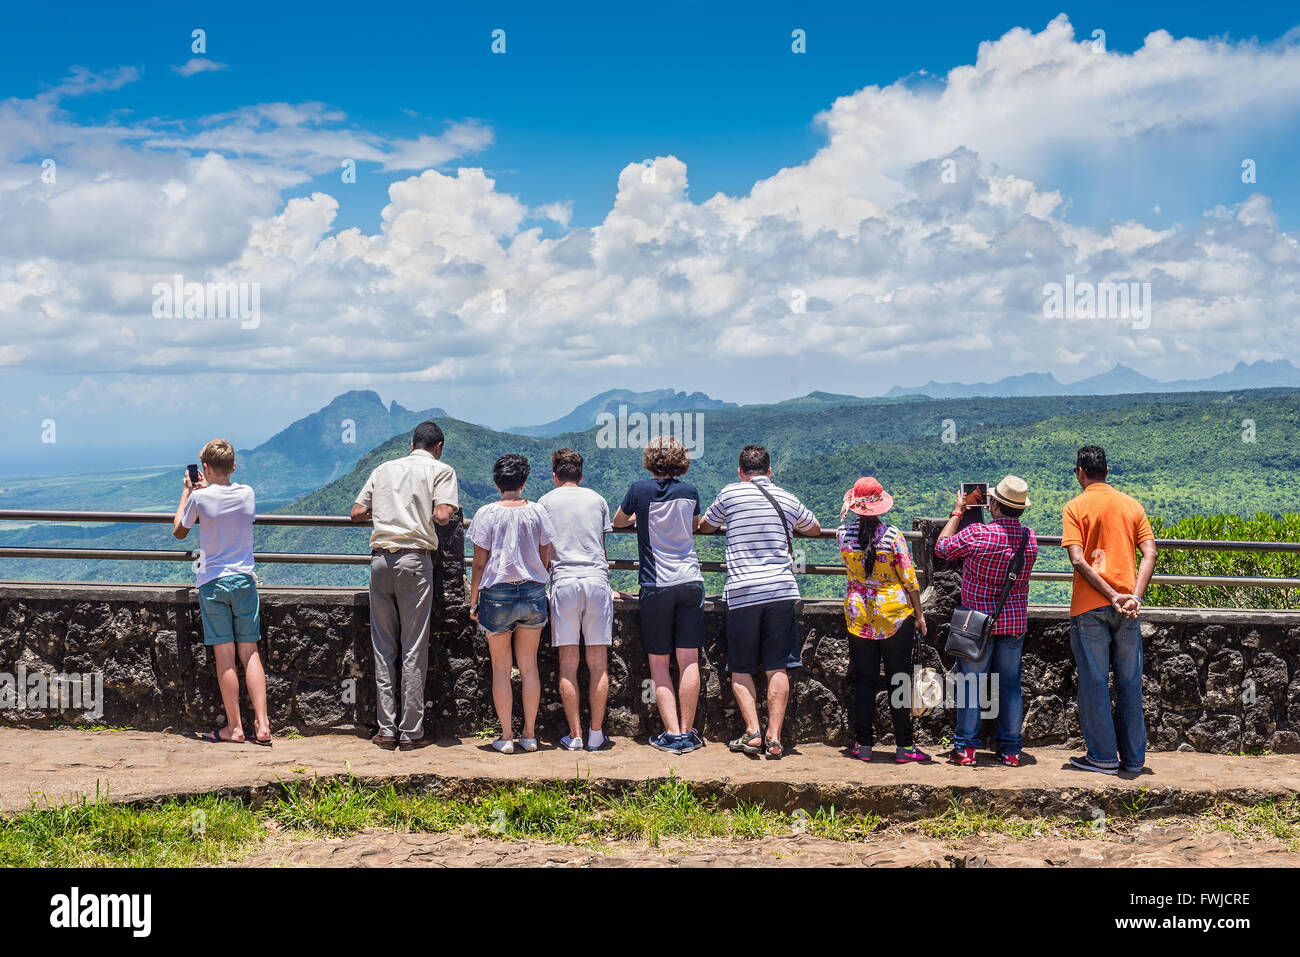 People watching for Black River Gorges National Park, Gorges Viewpoint in Mauri Stock Photo